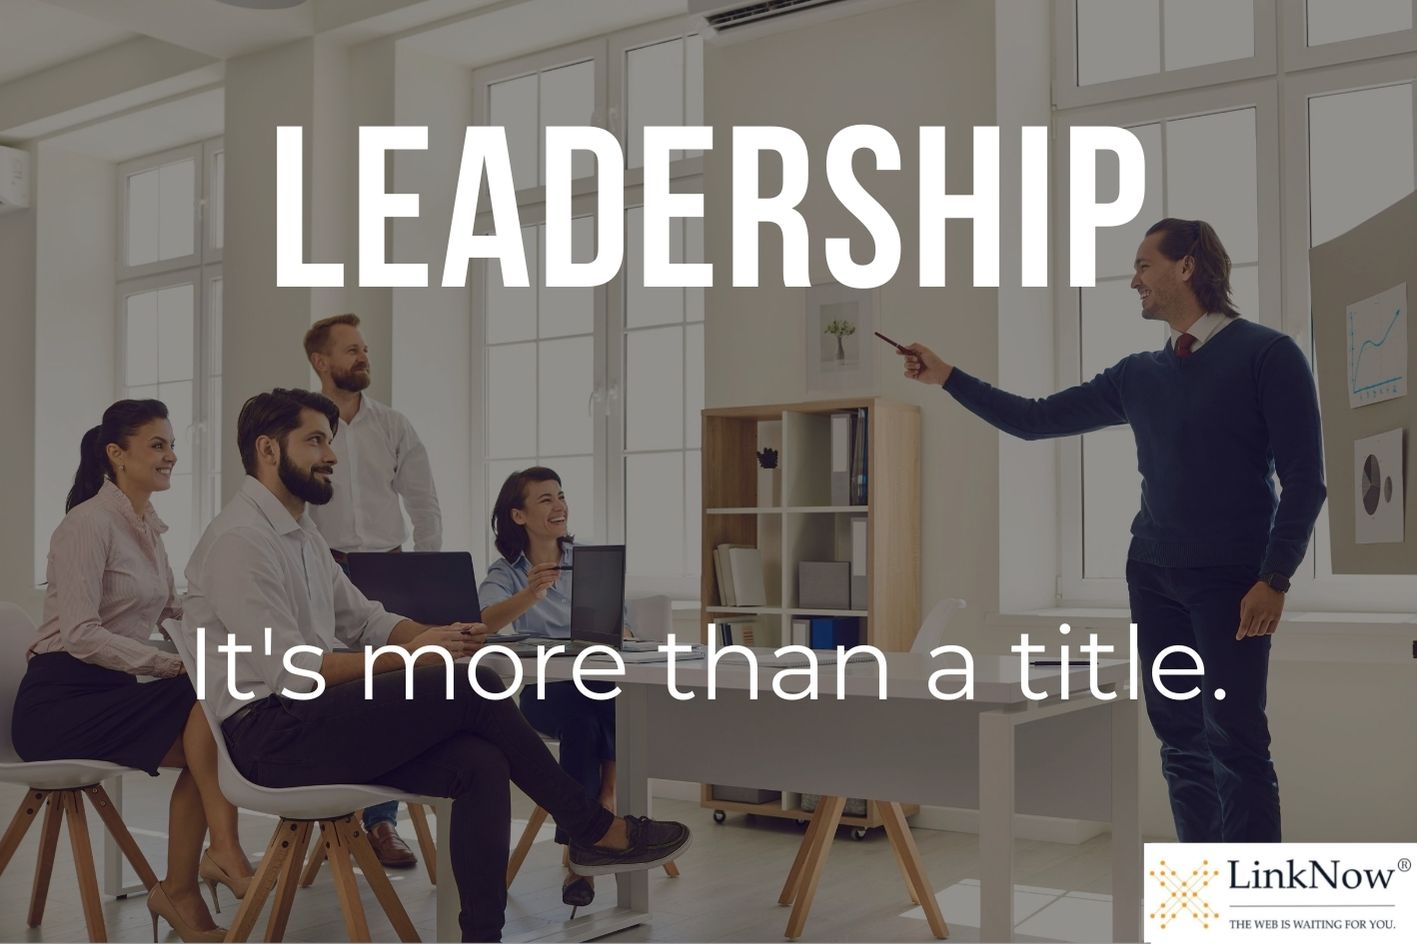 A man leads a discussion in an office. Title card says: "Leadership: It's more than a title."